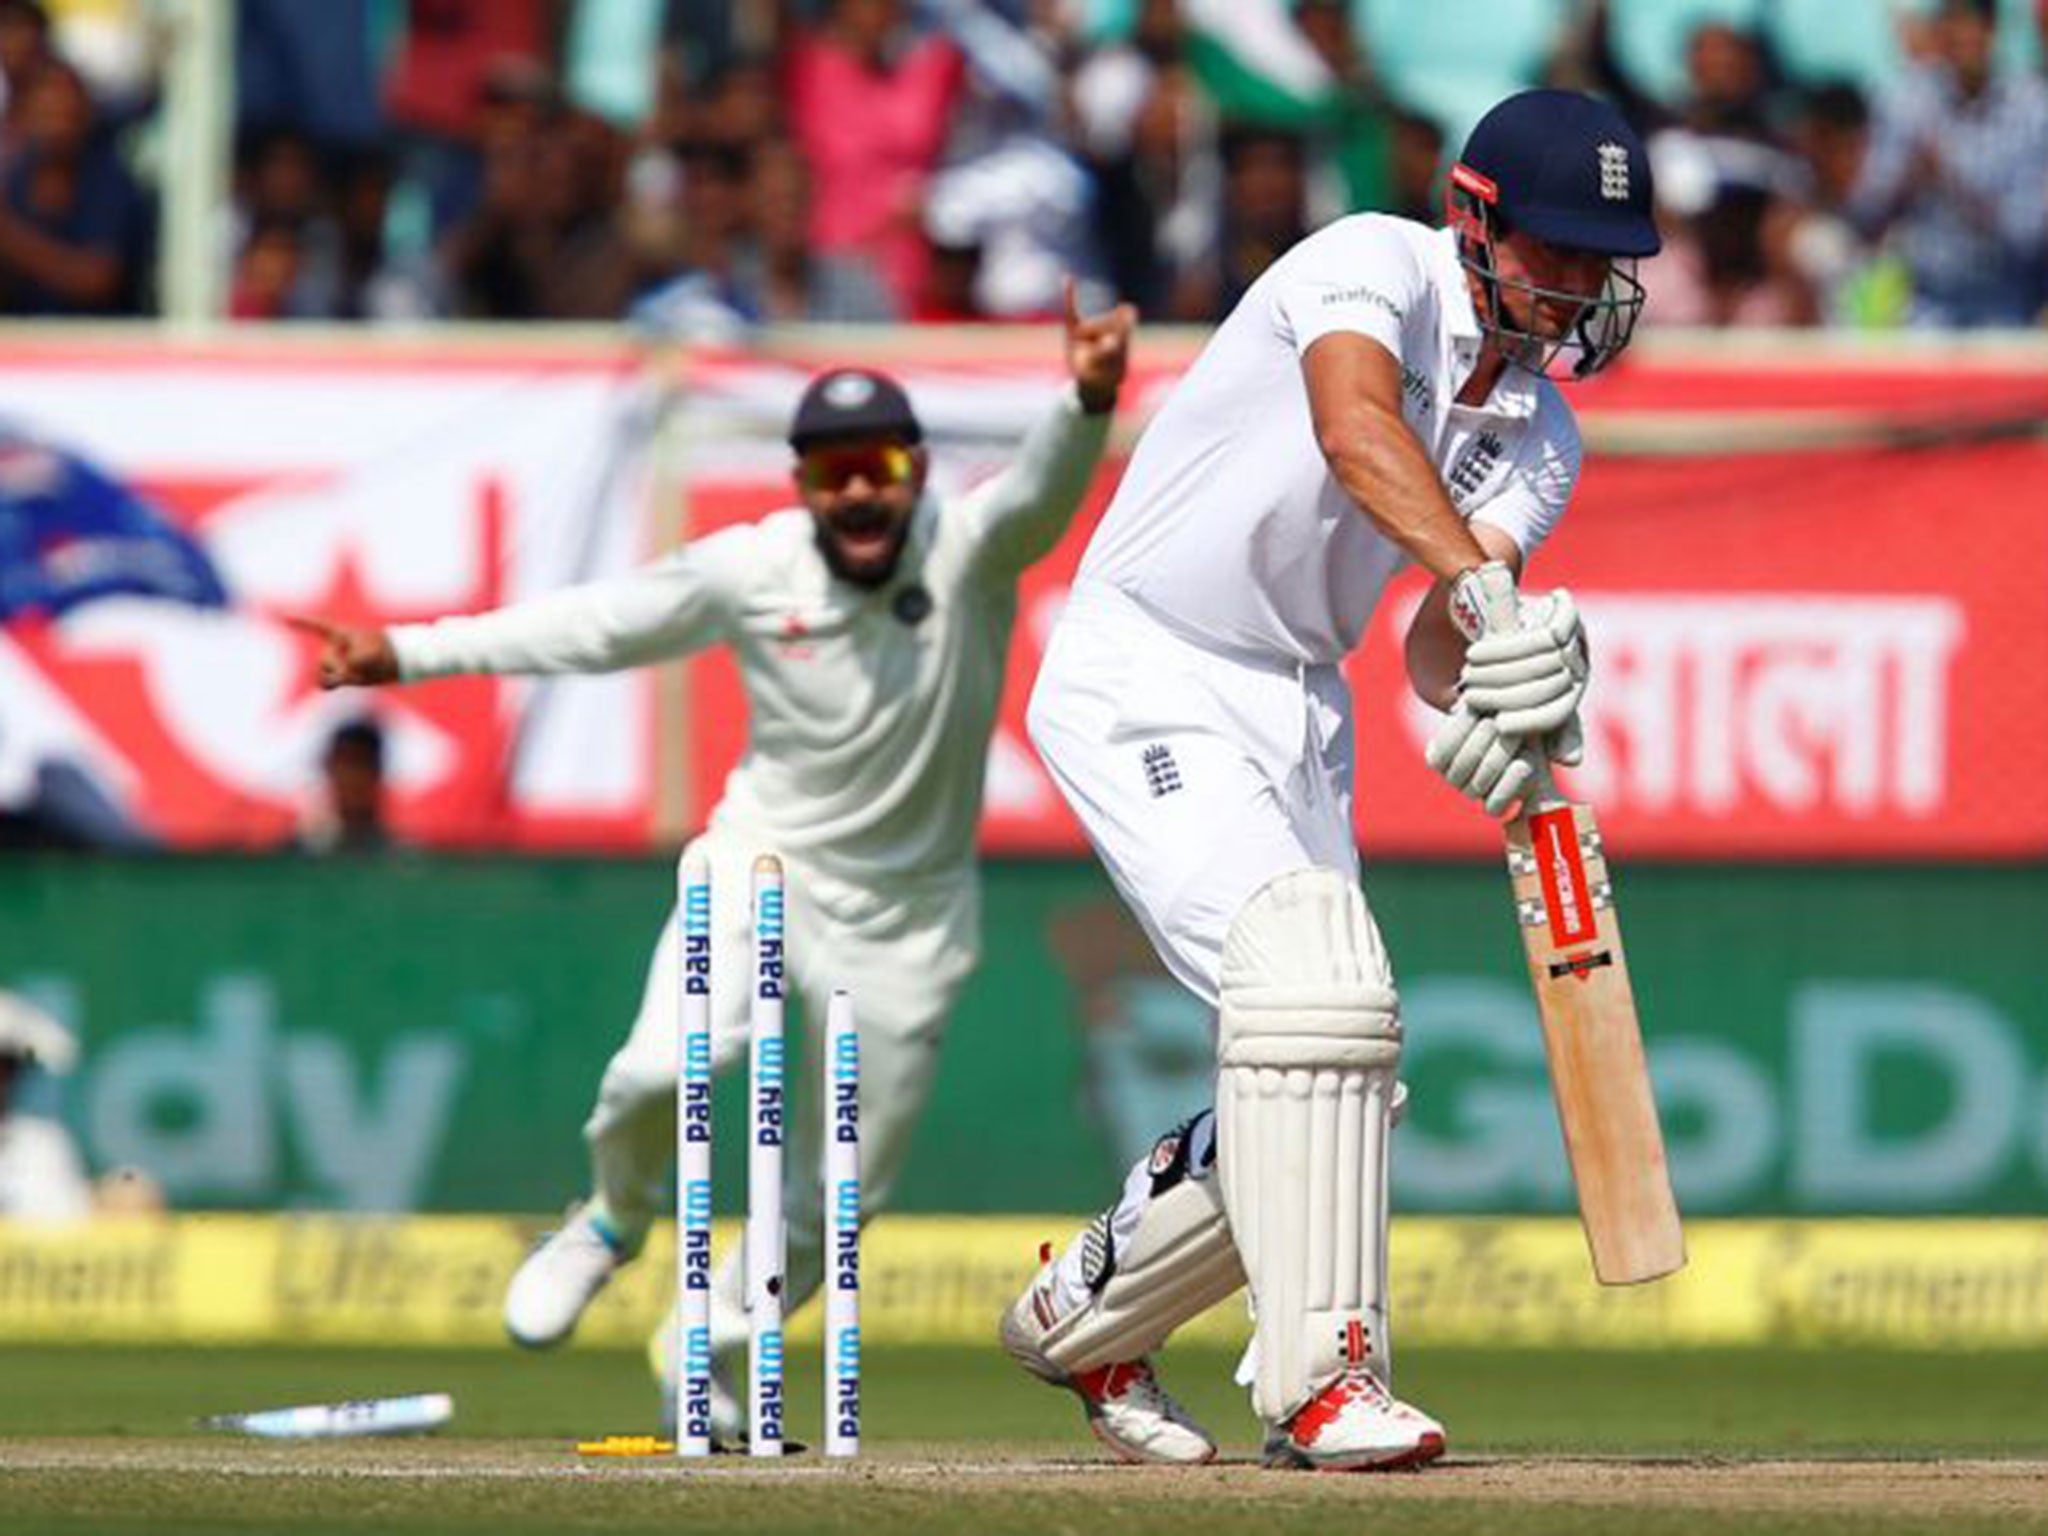 Alastair Cook is clean bowled by Mohammed Shami after snapping his off-stump in half